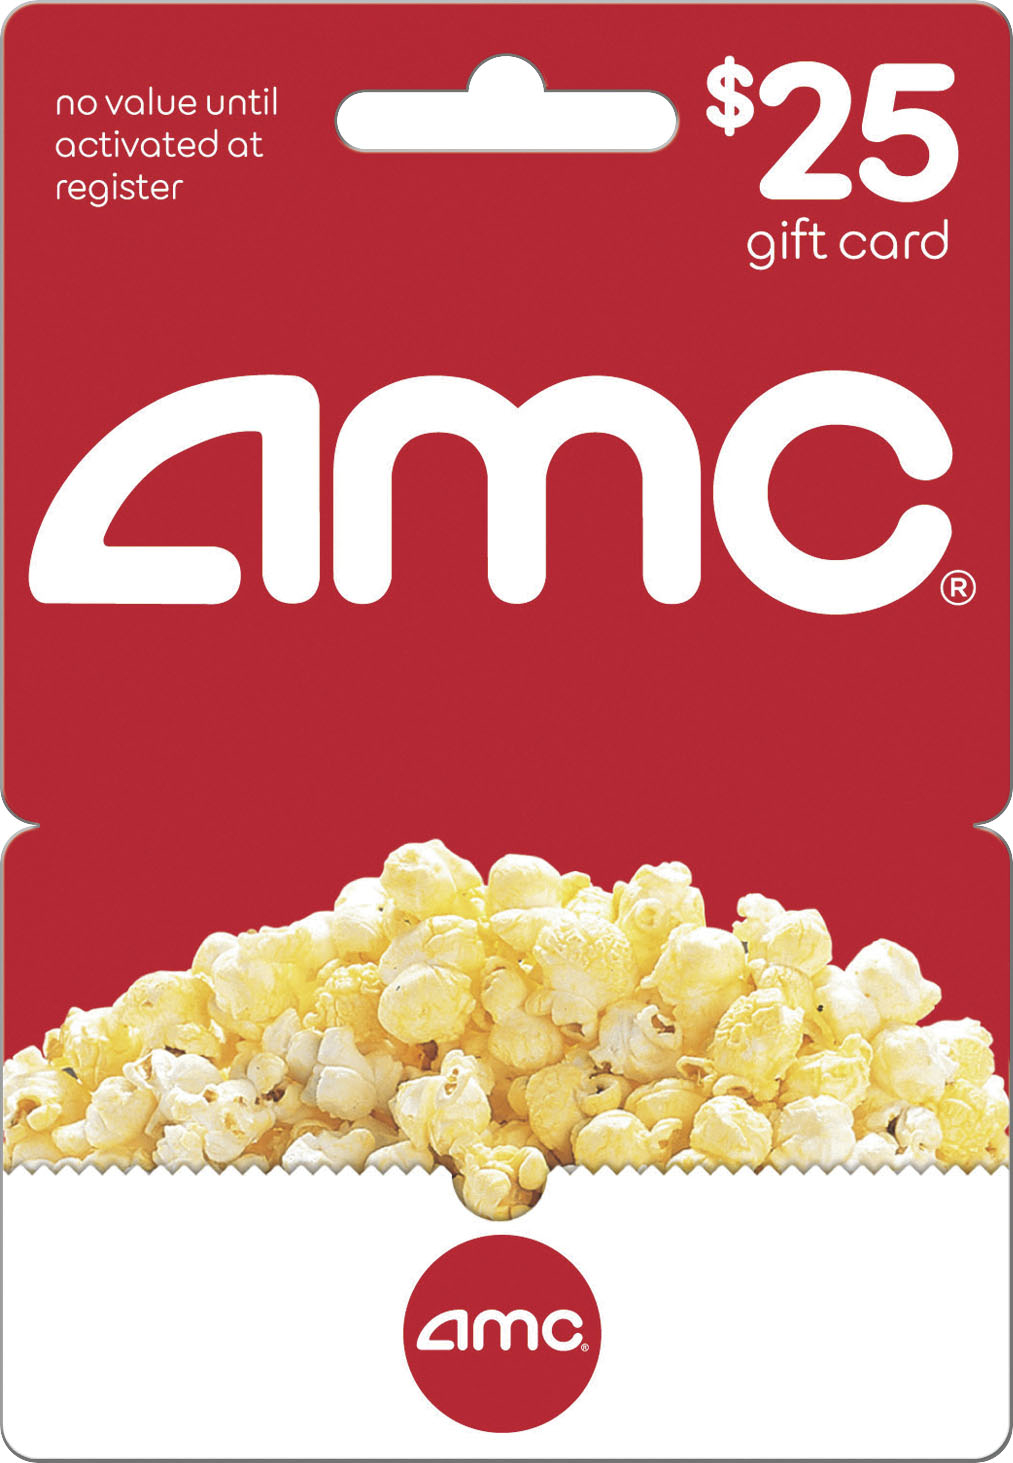 AMC Theatres - movie times, movie trailers, buy tickets and gift cards.